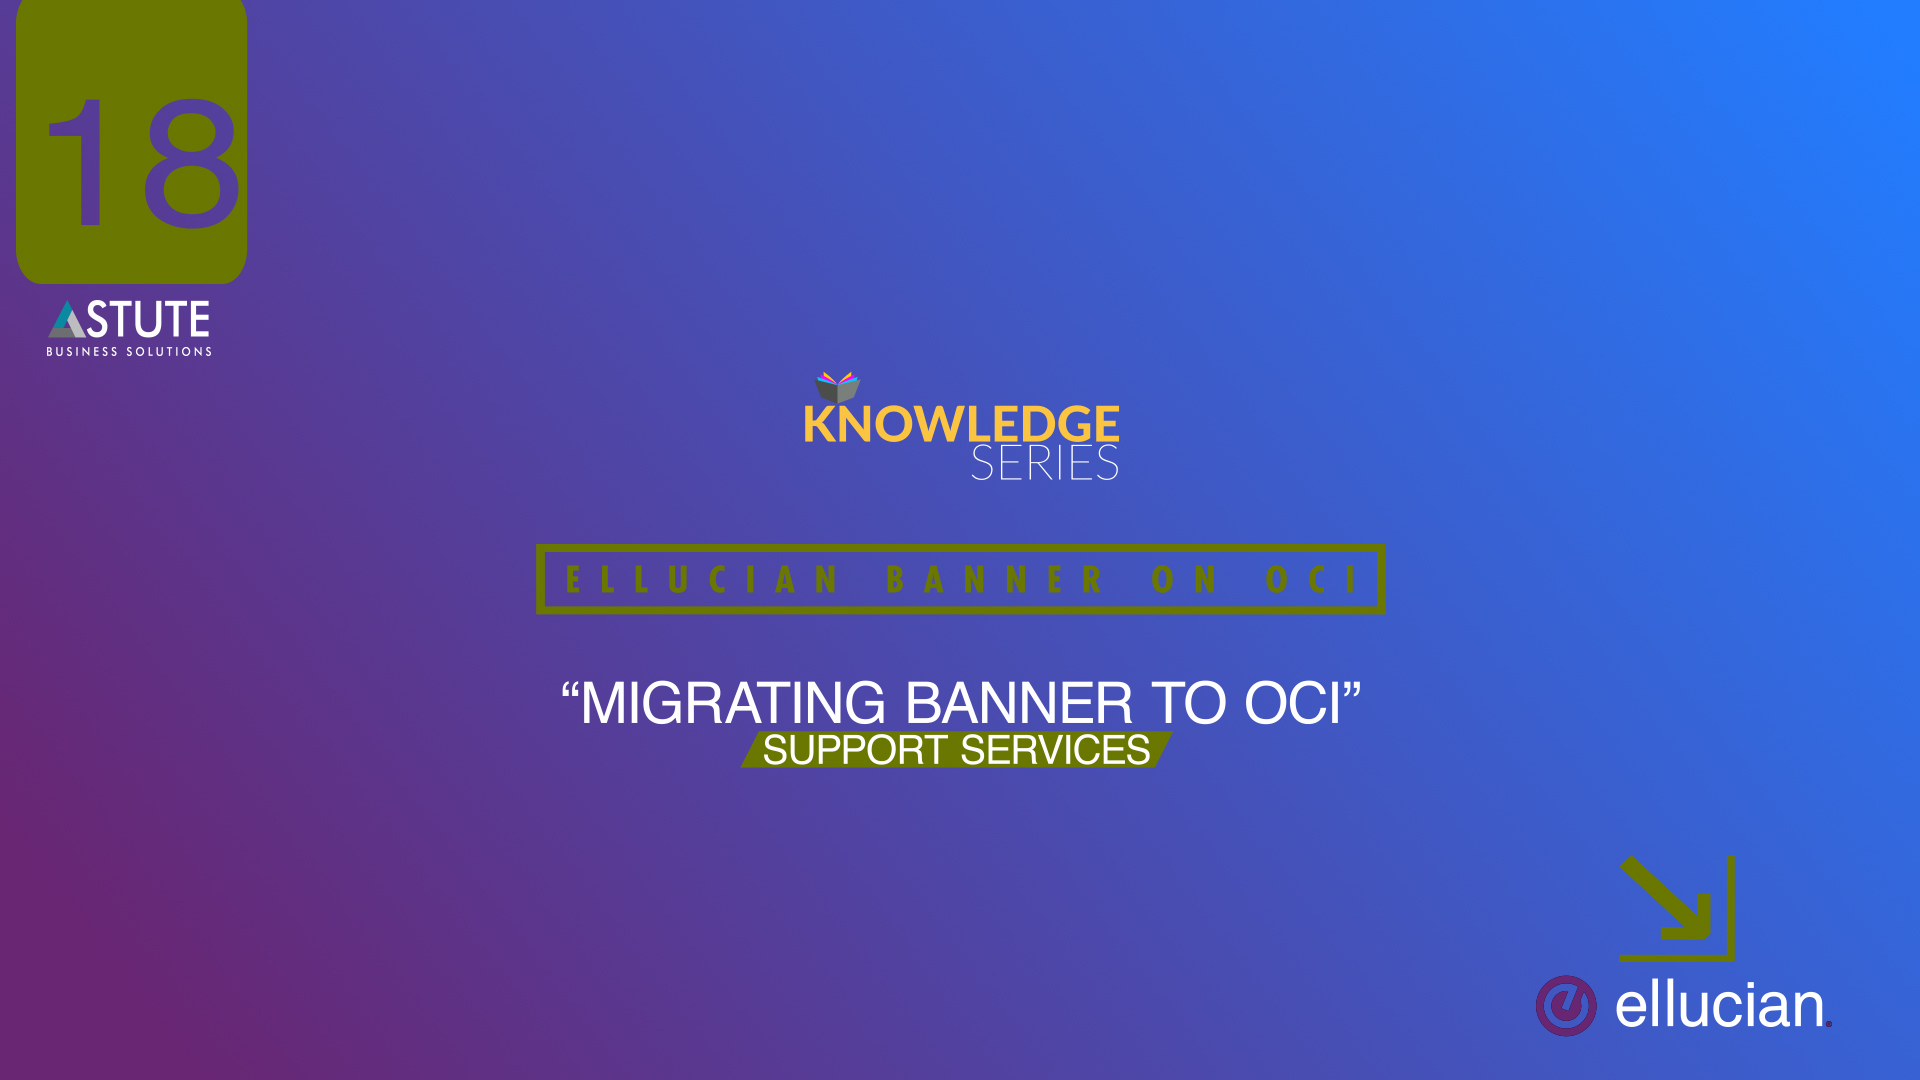 #18 Ellucian _Migrating Banner To OCI- Support Services